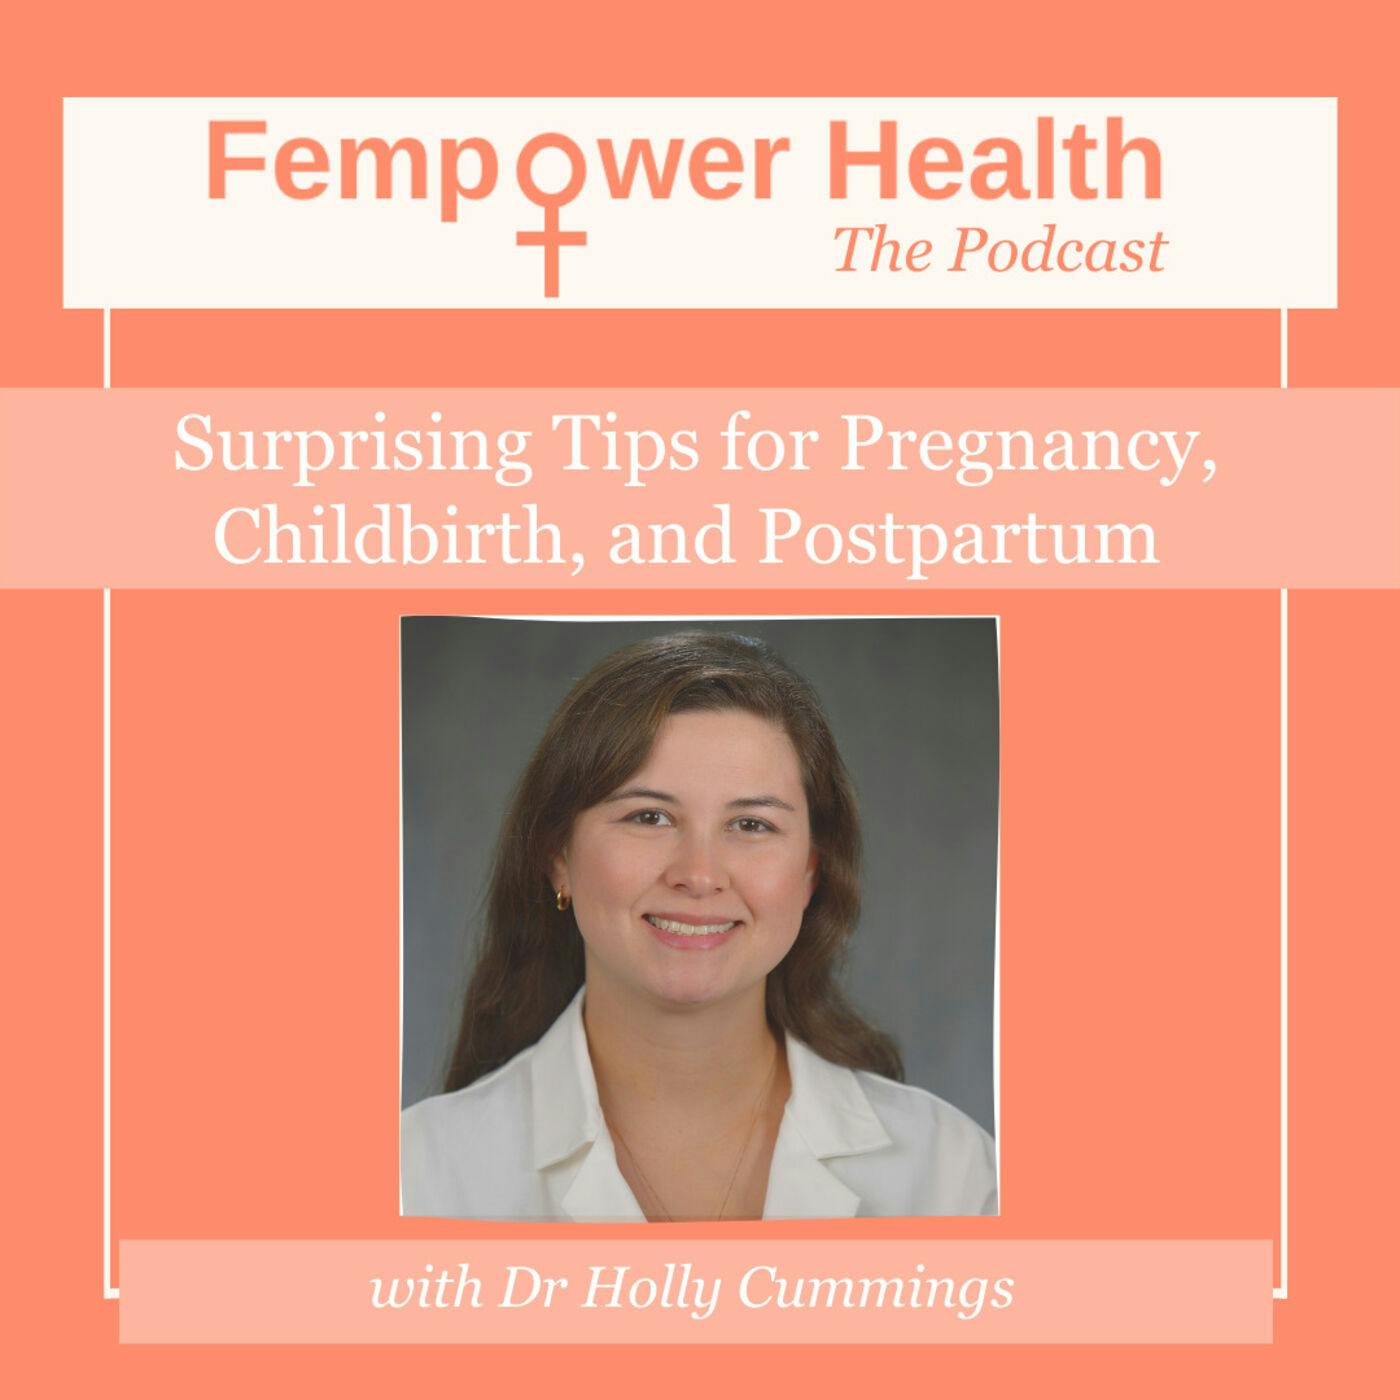 LISTEN AGAIN:  Surprising Tips for Pregnancy, Childbirth, and Postpartum | Dr Holly Cummings